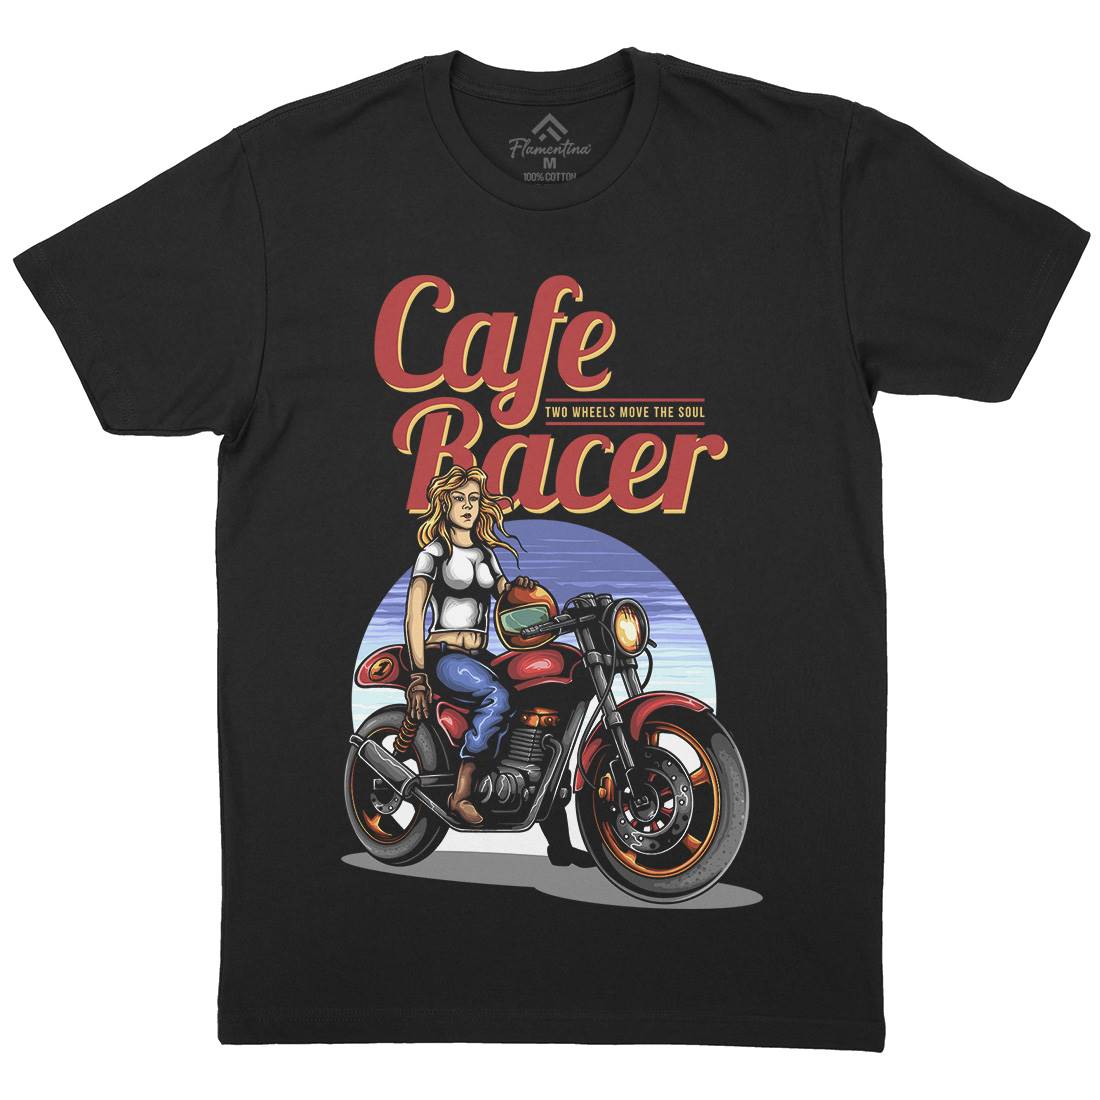 Cafe Racer Mens Organic Crew Neck T-Shirt Motorcycles A407